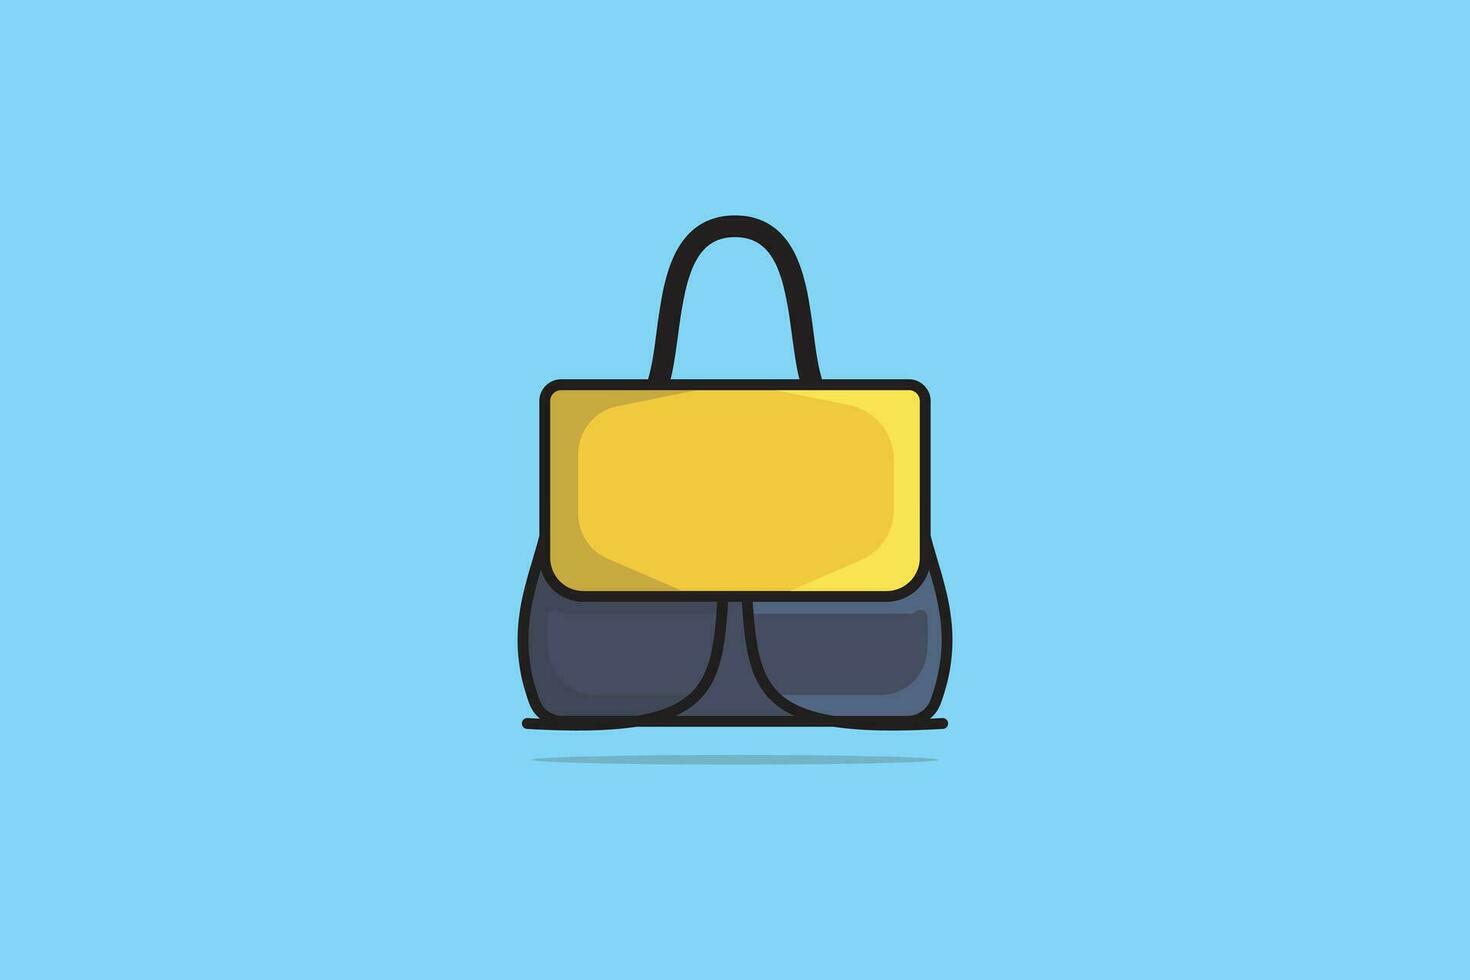 Woman Fashion Handbag with black handle vector illustration. Beauty fashion objects icon concept. Glossy bright yellow and grey woman bag design for fashion.